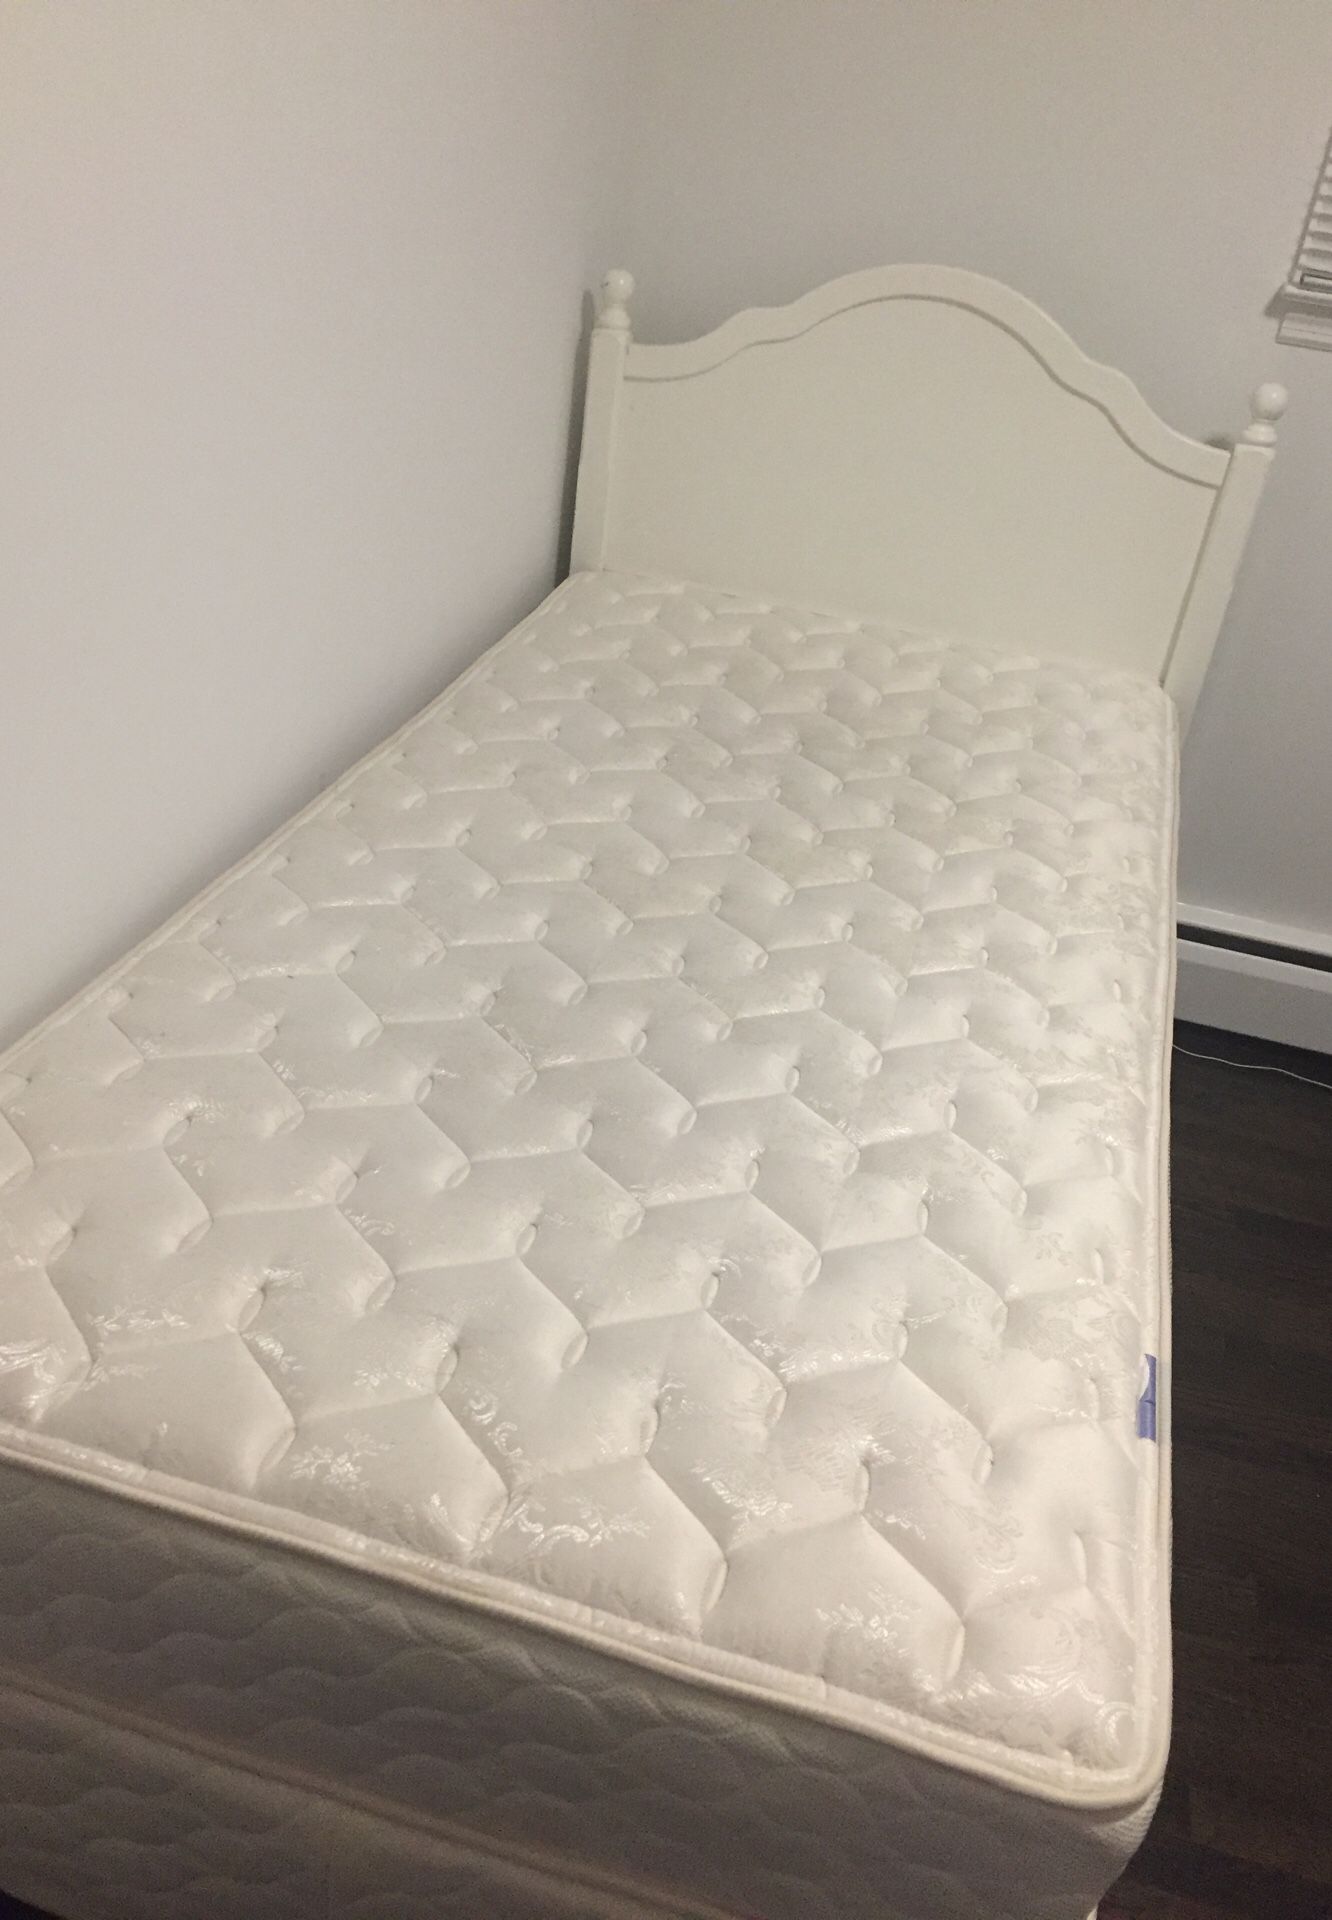 Twin bed full set with headboard. Comes with mattress, box spring, bed frame, and headboard